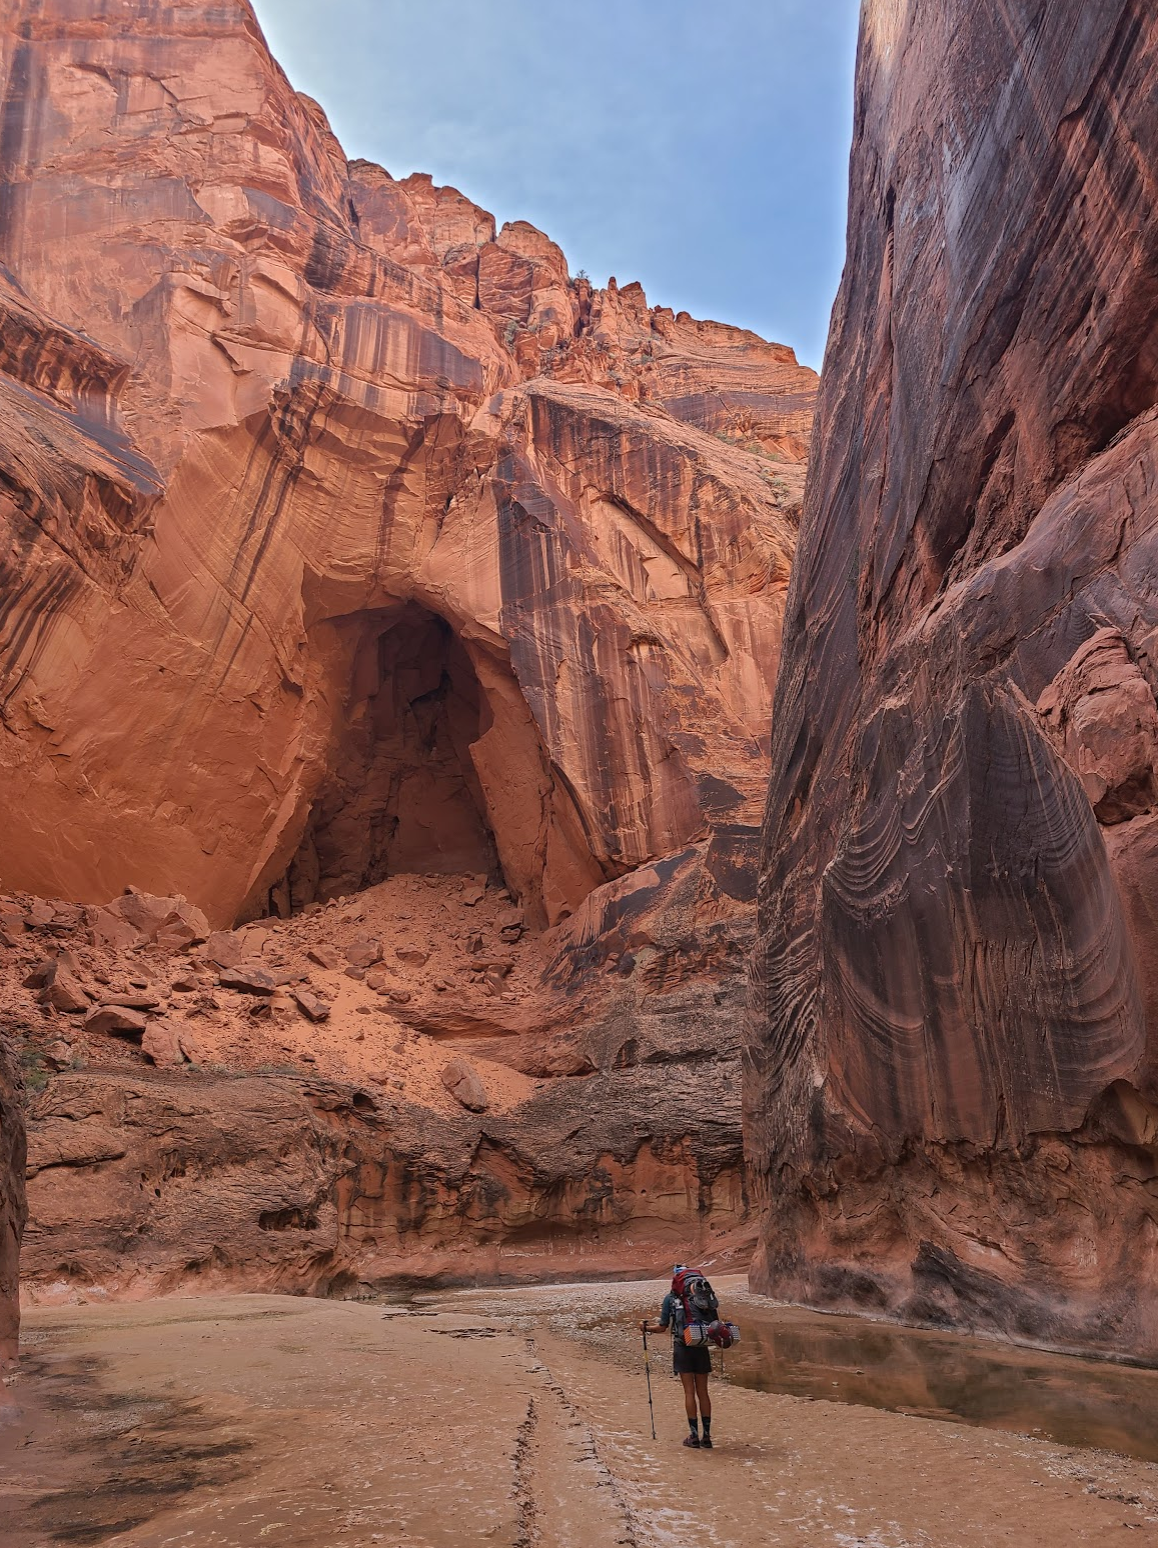 Camper submitted image from Paria Canyon Wilderness - The Hole Backcountry Campsite - 3